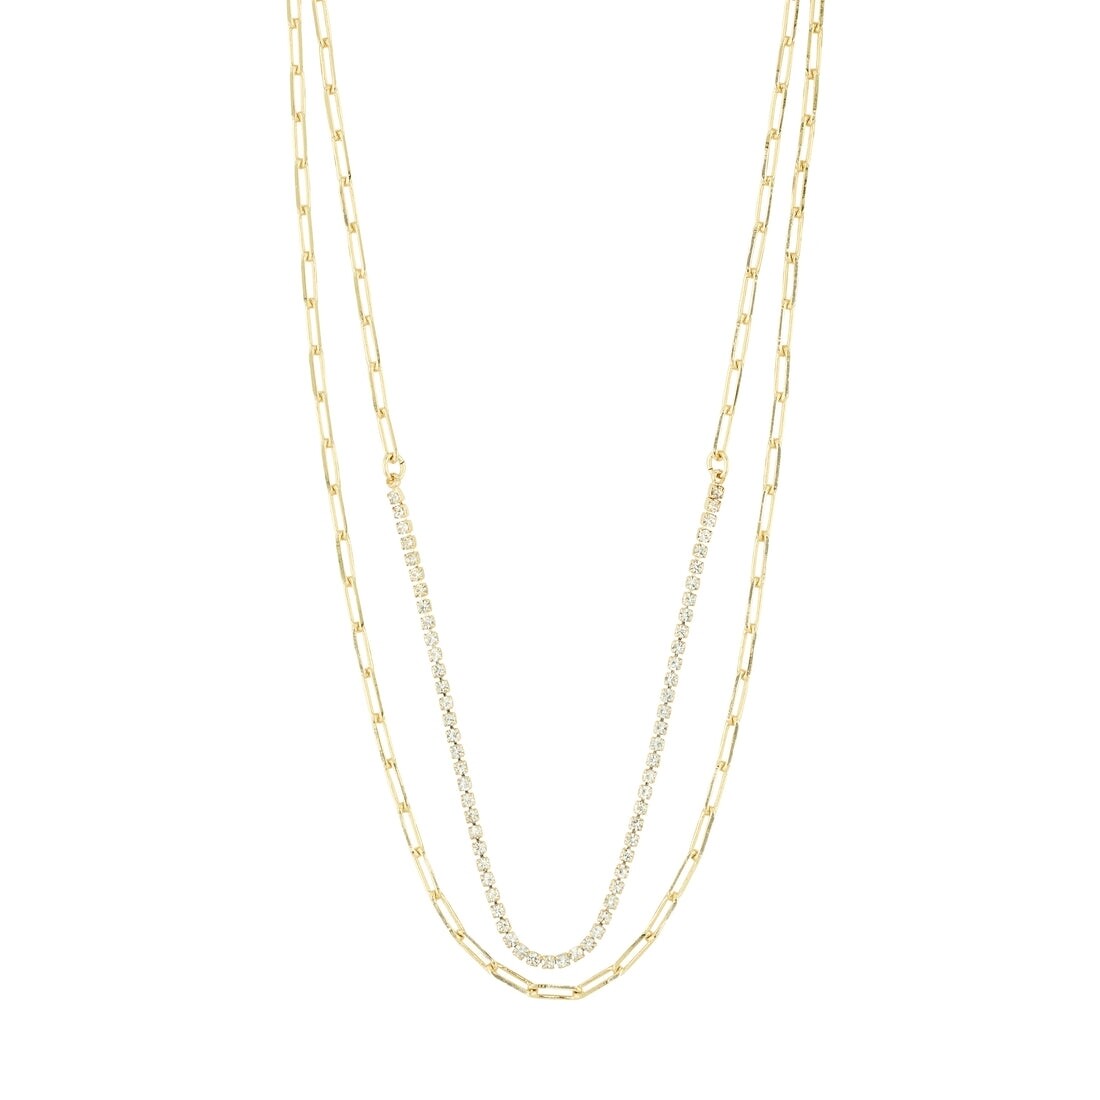 Pilgrim Gold Rowan Recycled 2-in-1 Necklace